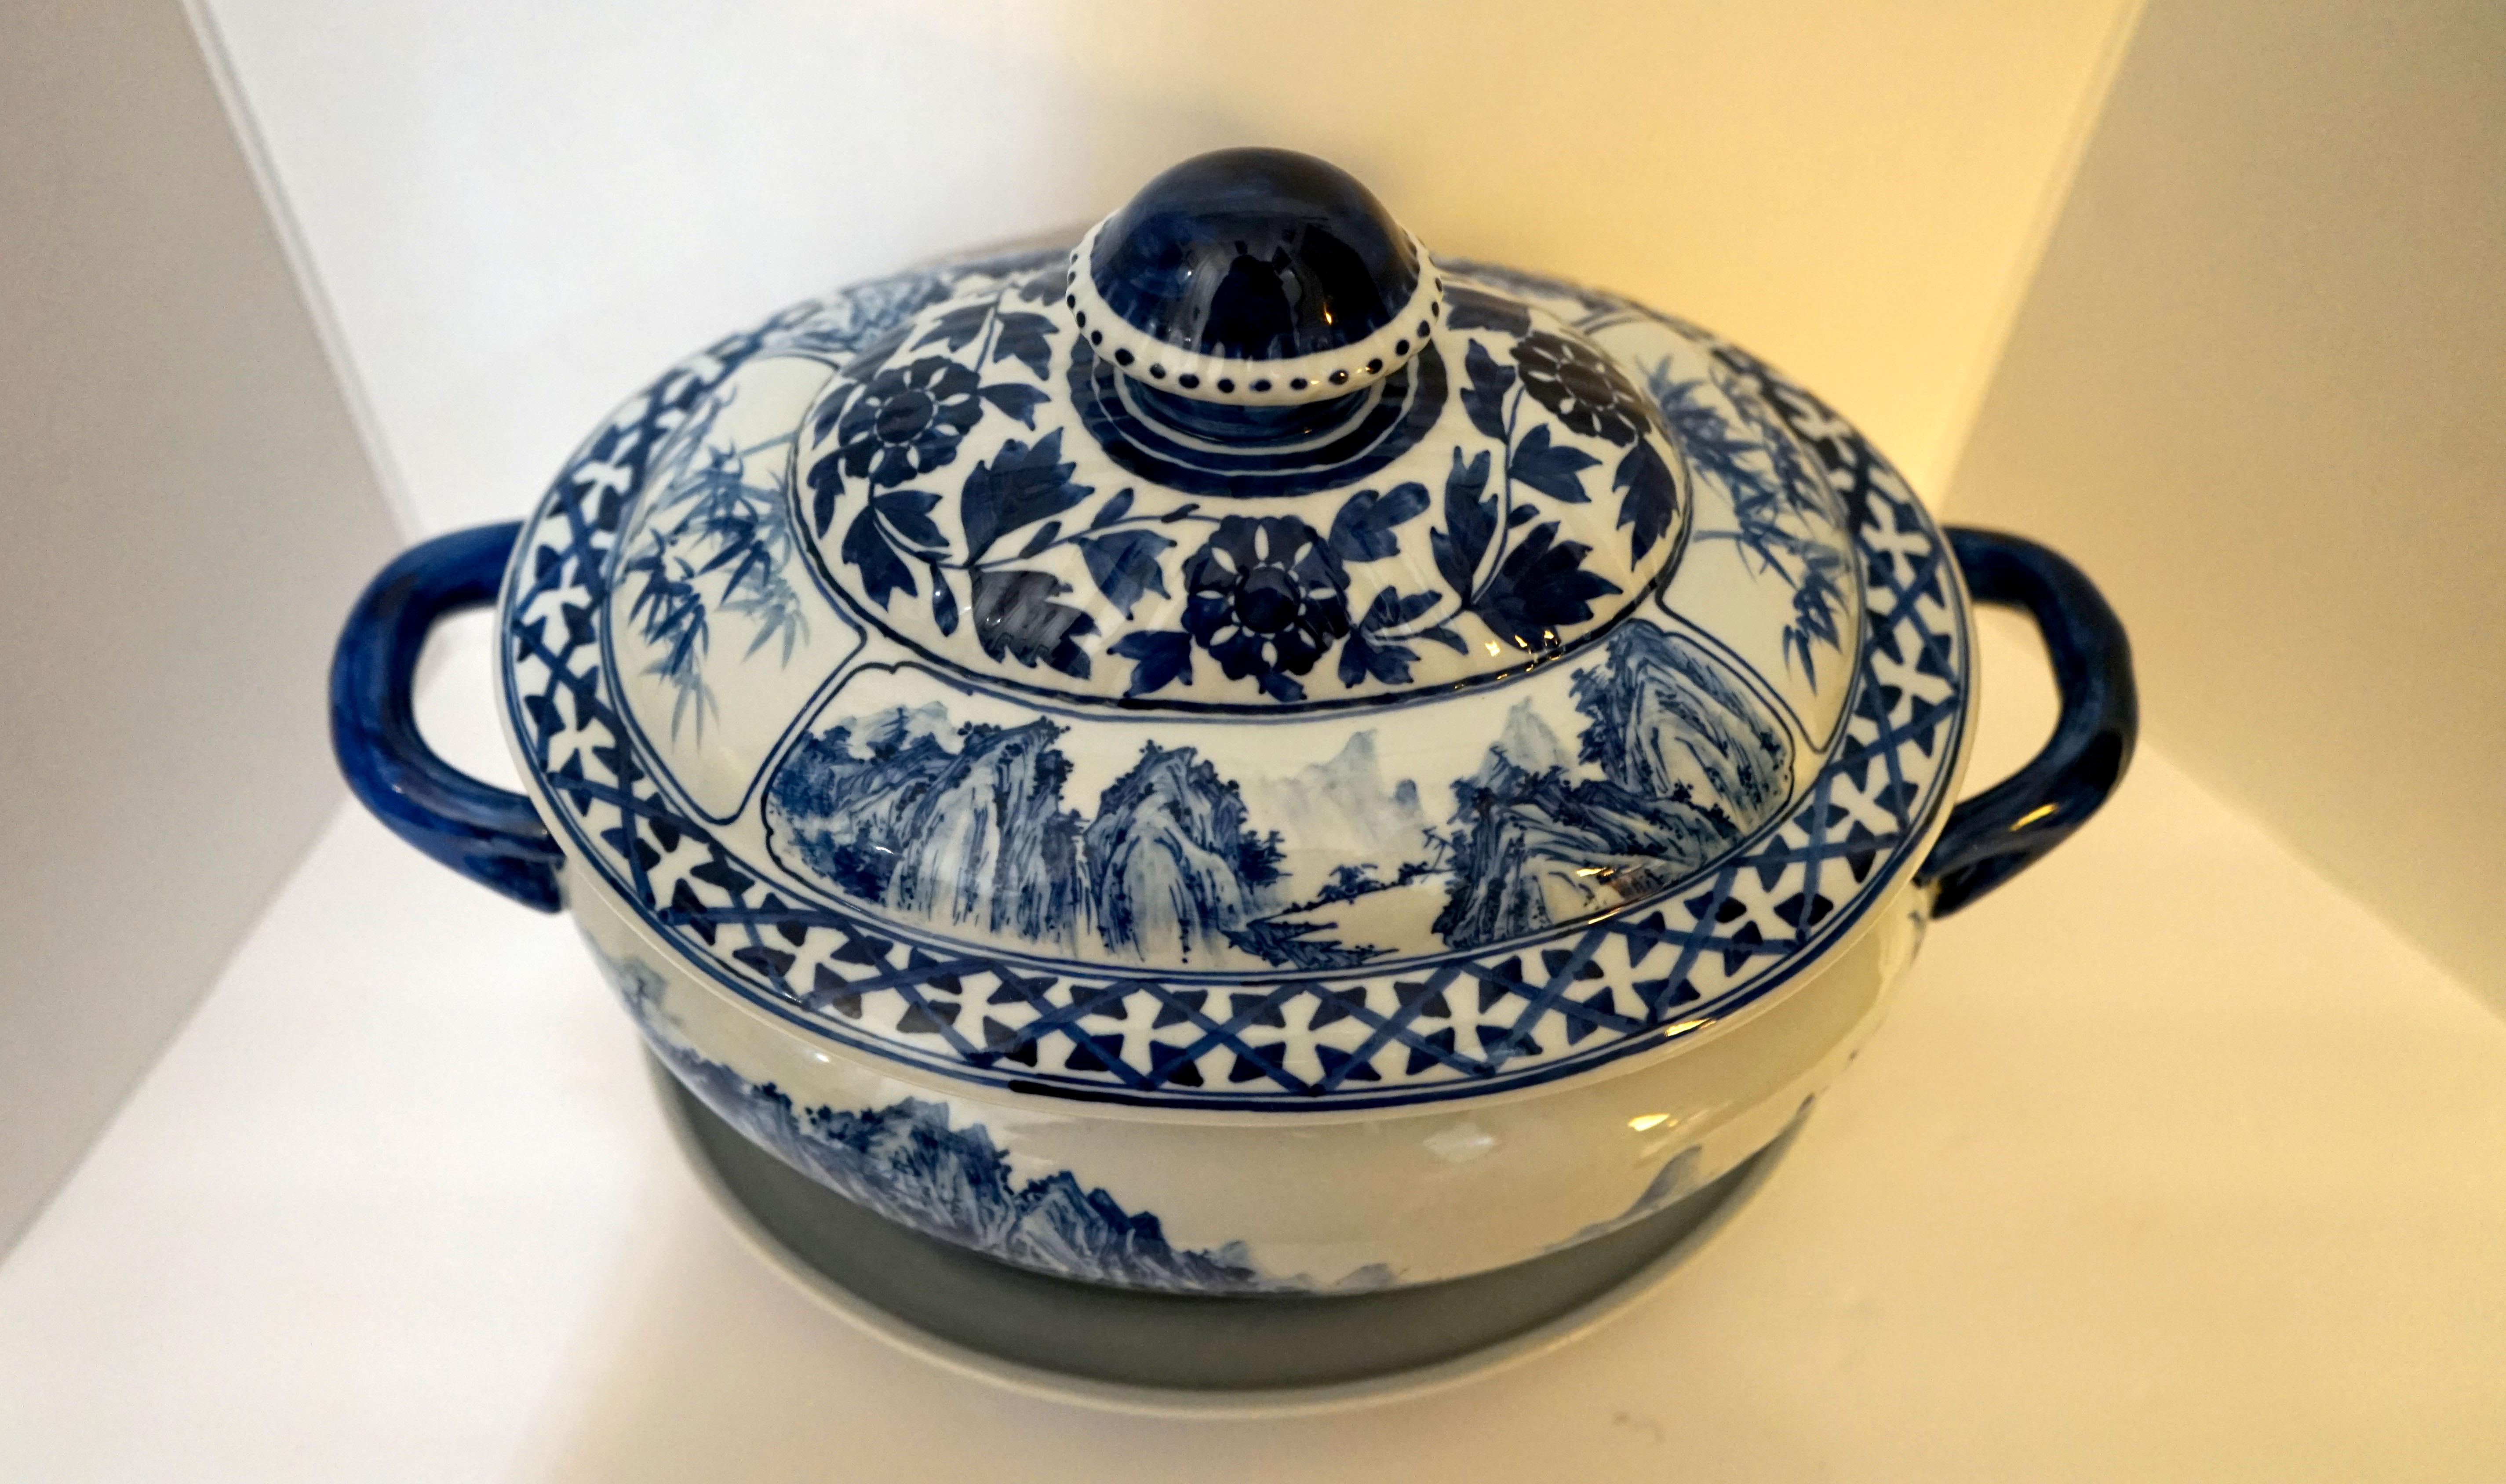 soup tureen with under plate